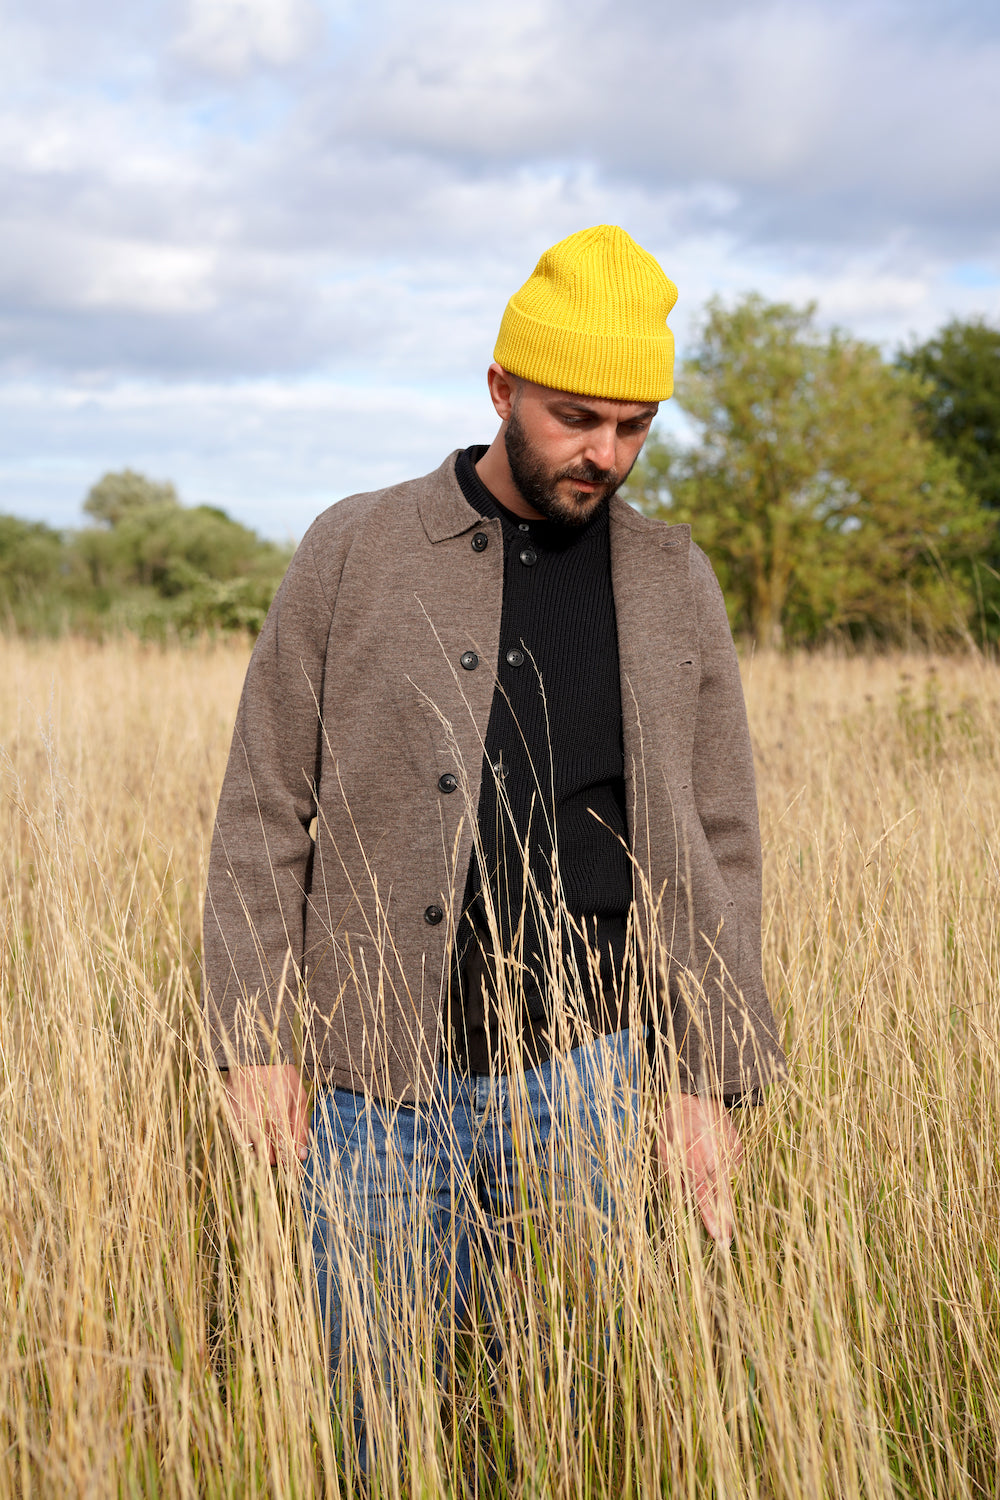 Alf wearing Work Jacket in Natural Taupe and Beanie Long in Yellow